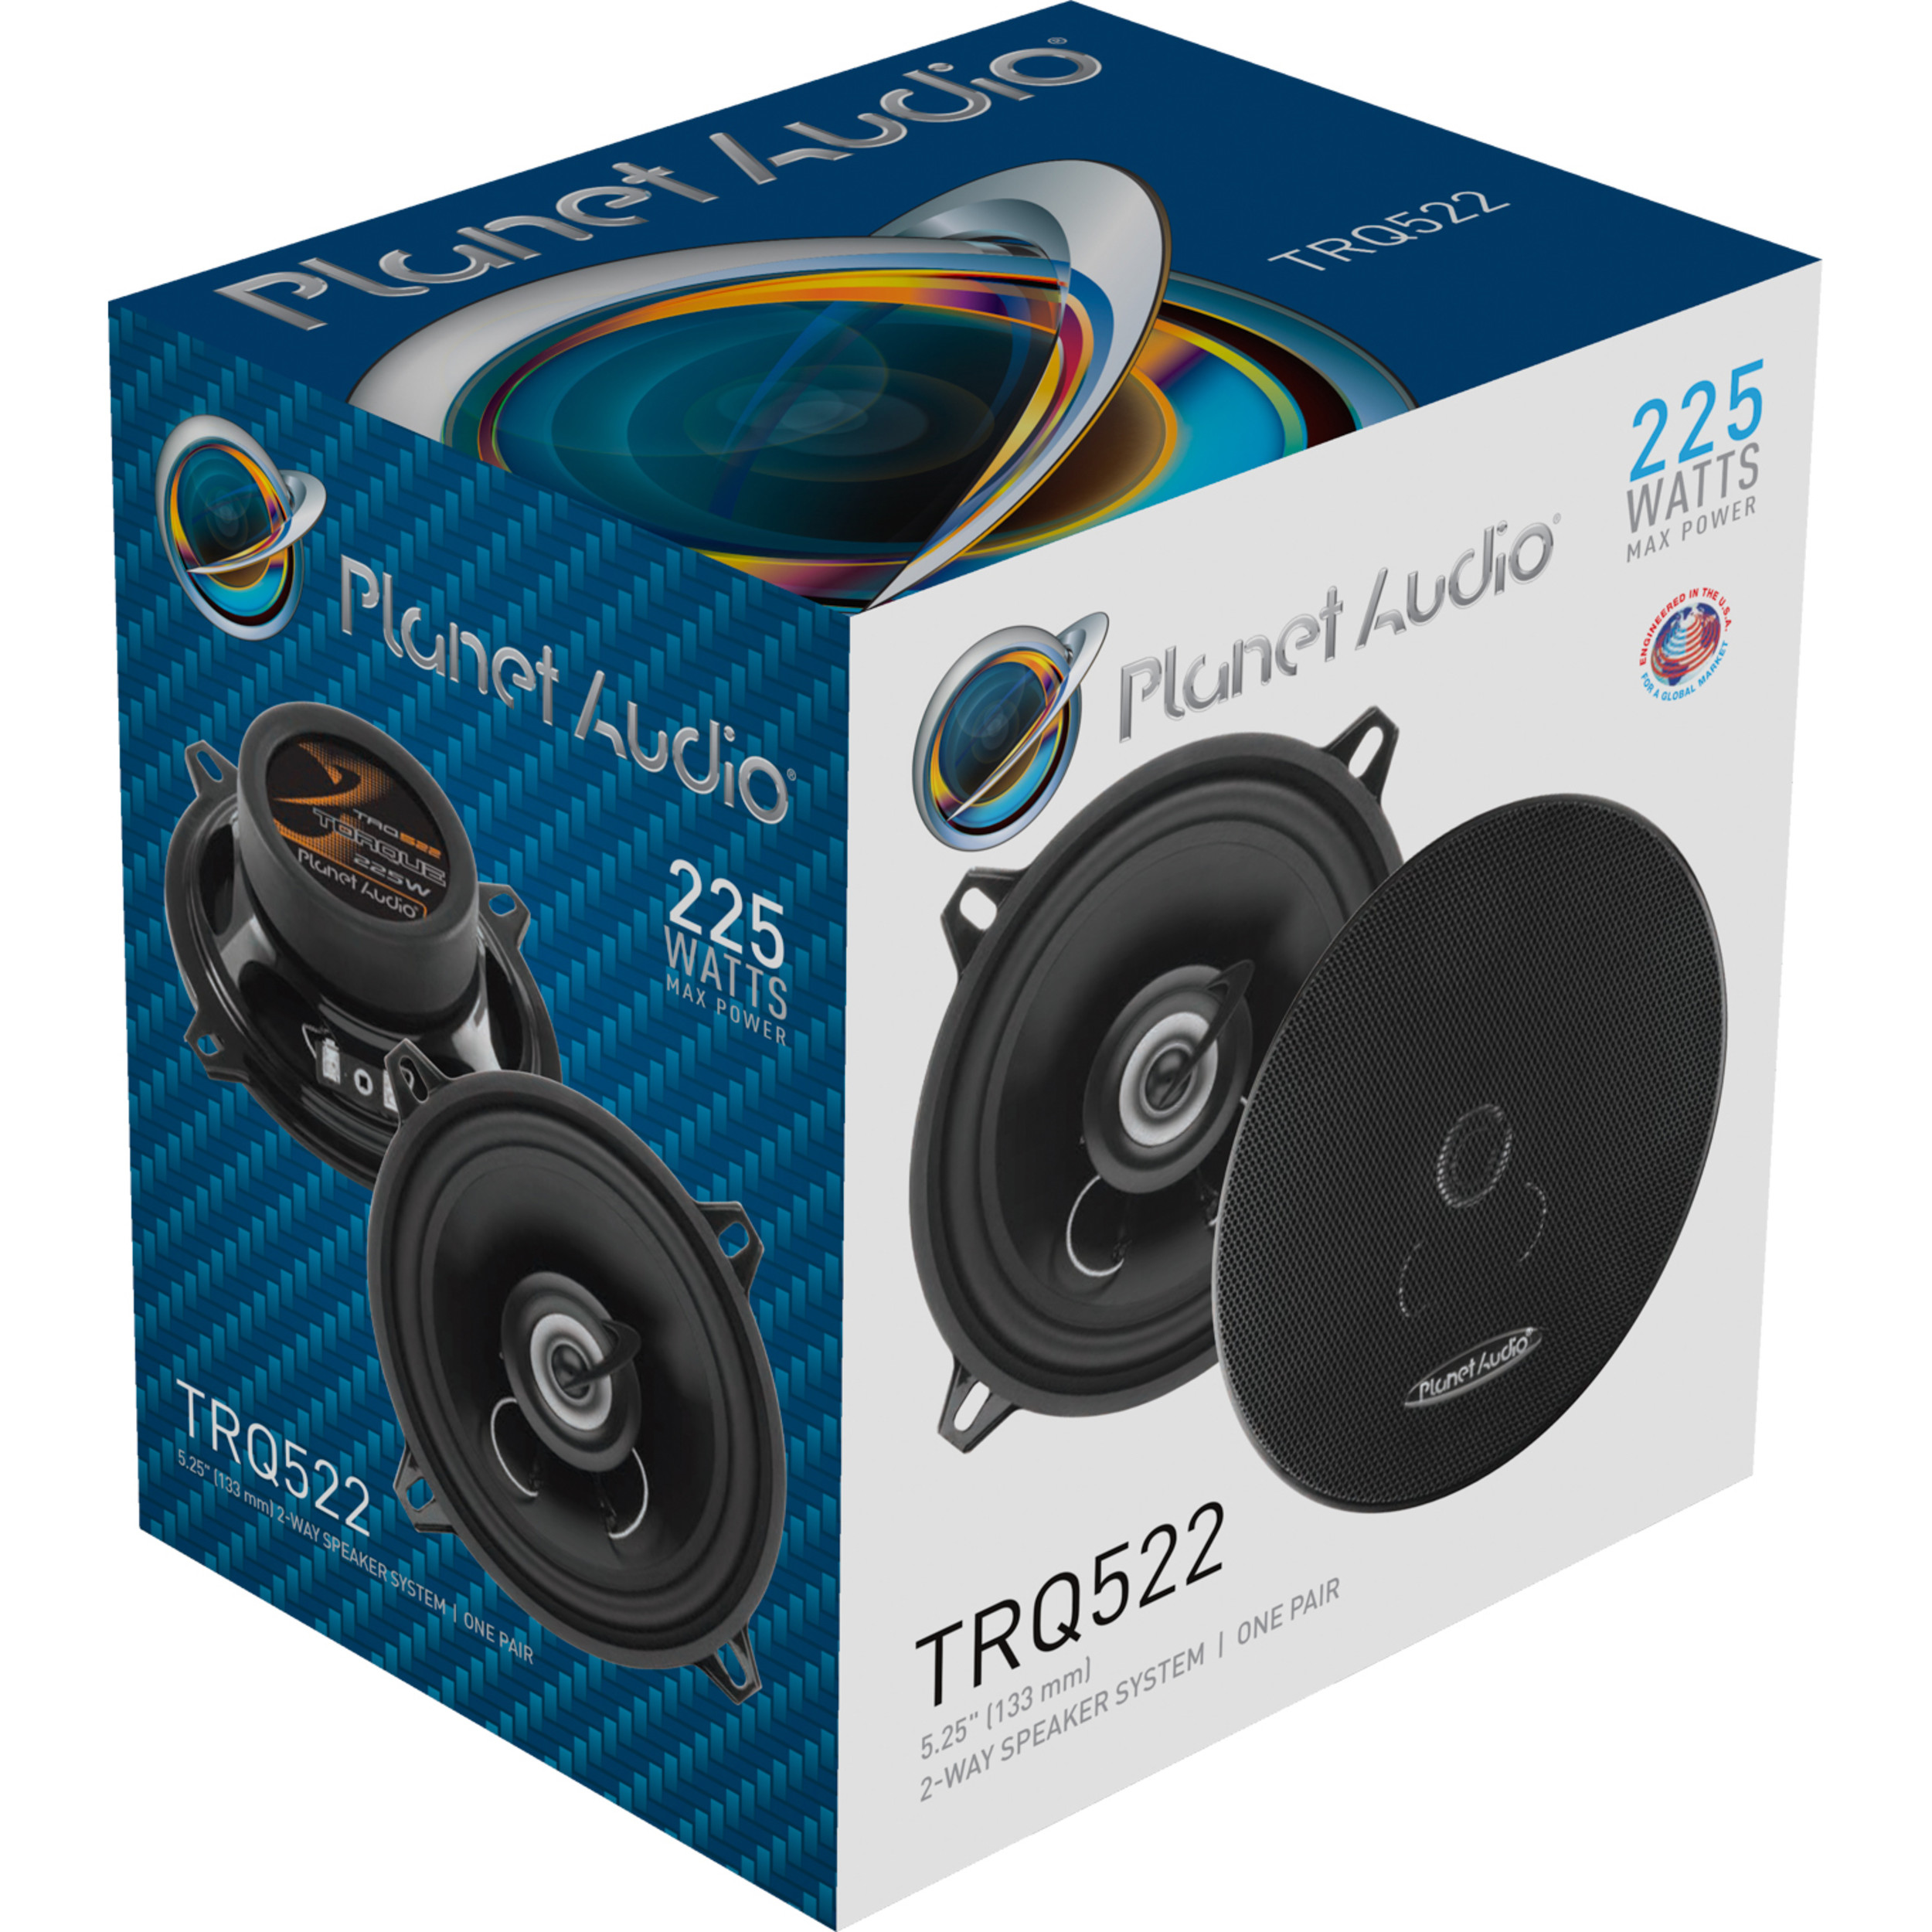 Planet Audio TRQ522 Torque Series 5.25 Inch Car Audio Door Speakers - 225 Watts Max, 2 Way, Full Range, Coaxial, Sold in Pairs, Hook Up To Stereo and Amplifier, Tweeters - image 5 of 9